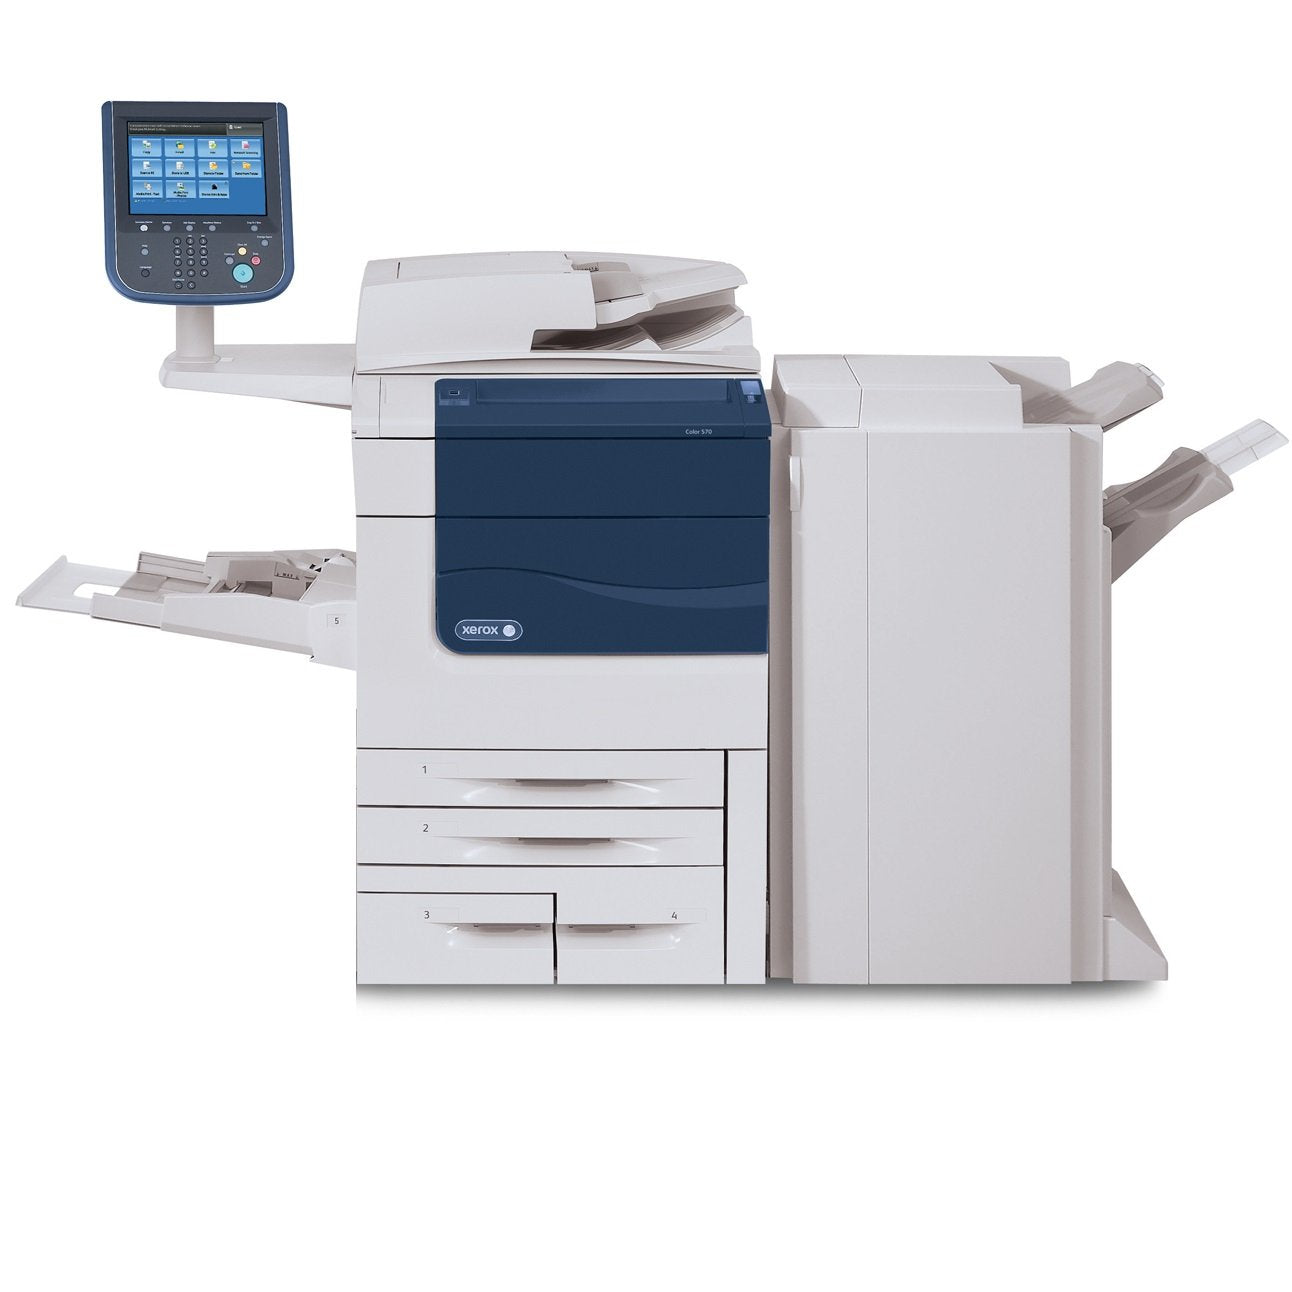 Absolute Toner $125/month Xerox Color 550 Production Printer Copier Scanner Booklet Maker Finisher Print Shop photocopier REPOSSESSED Office Copiers In Warehouse